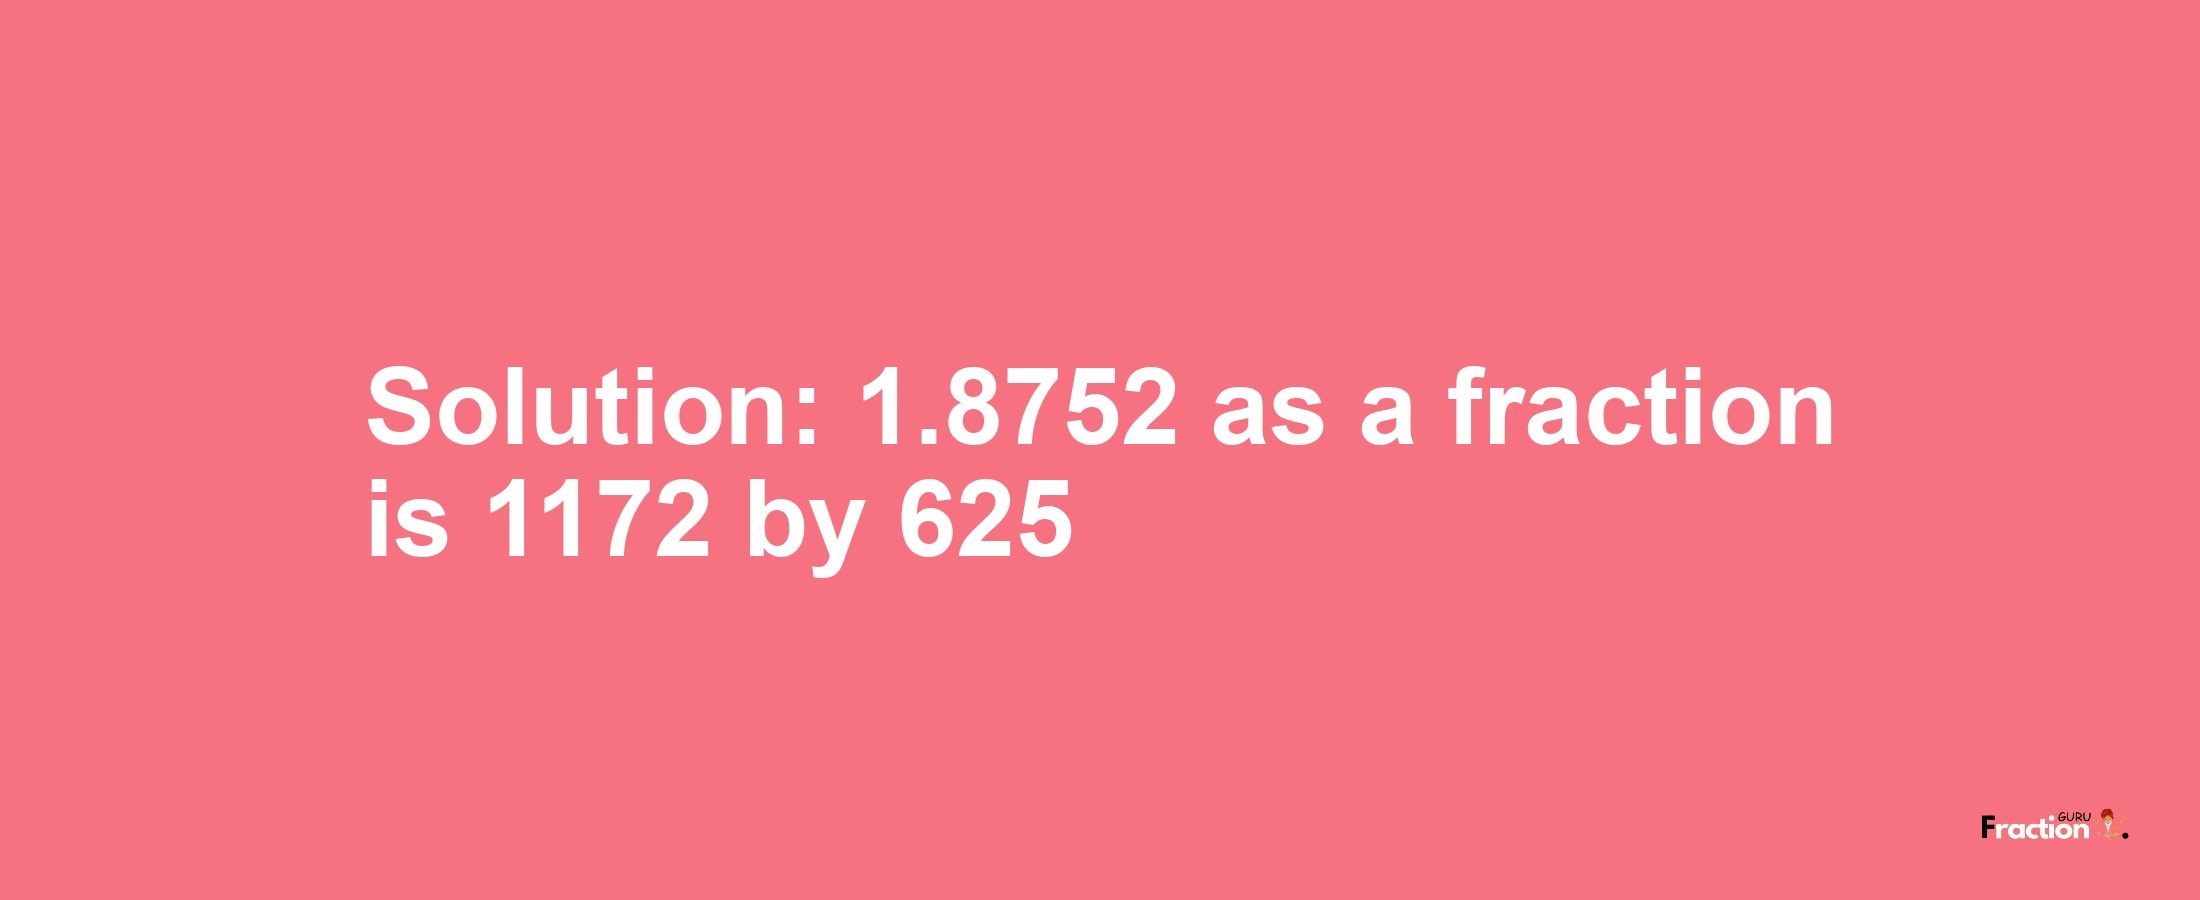 Solution:1.8752 as a fraction is 1172/625